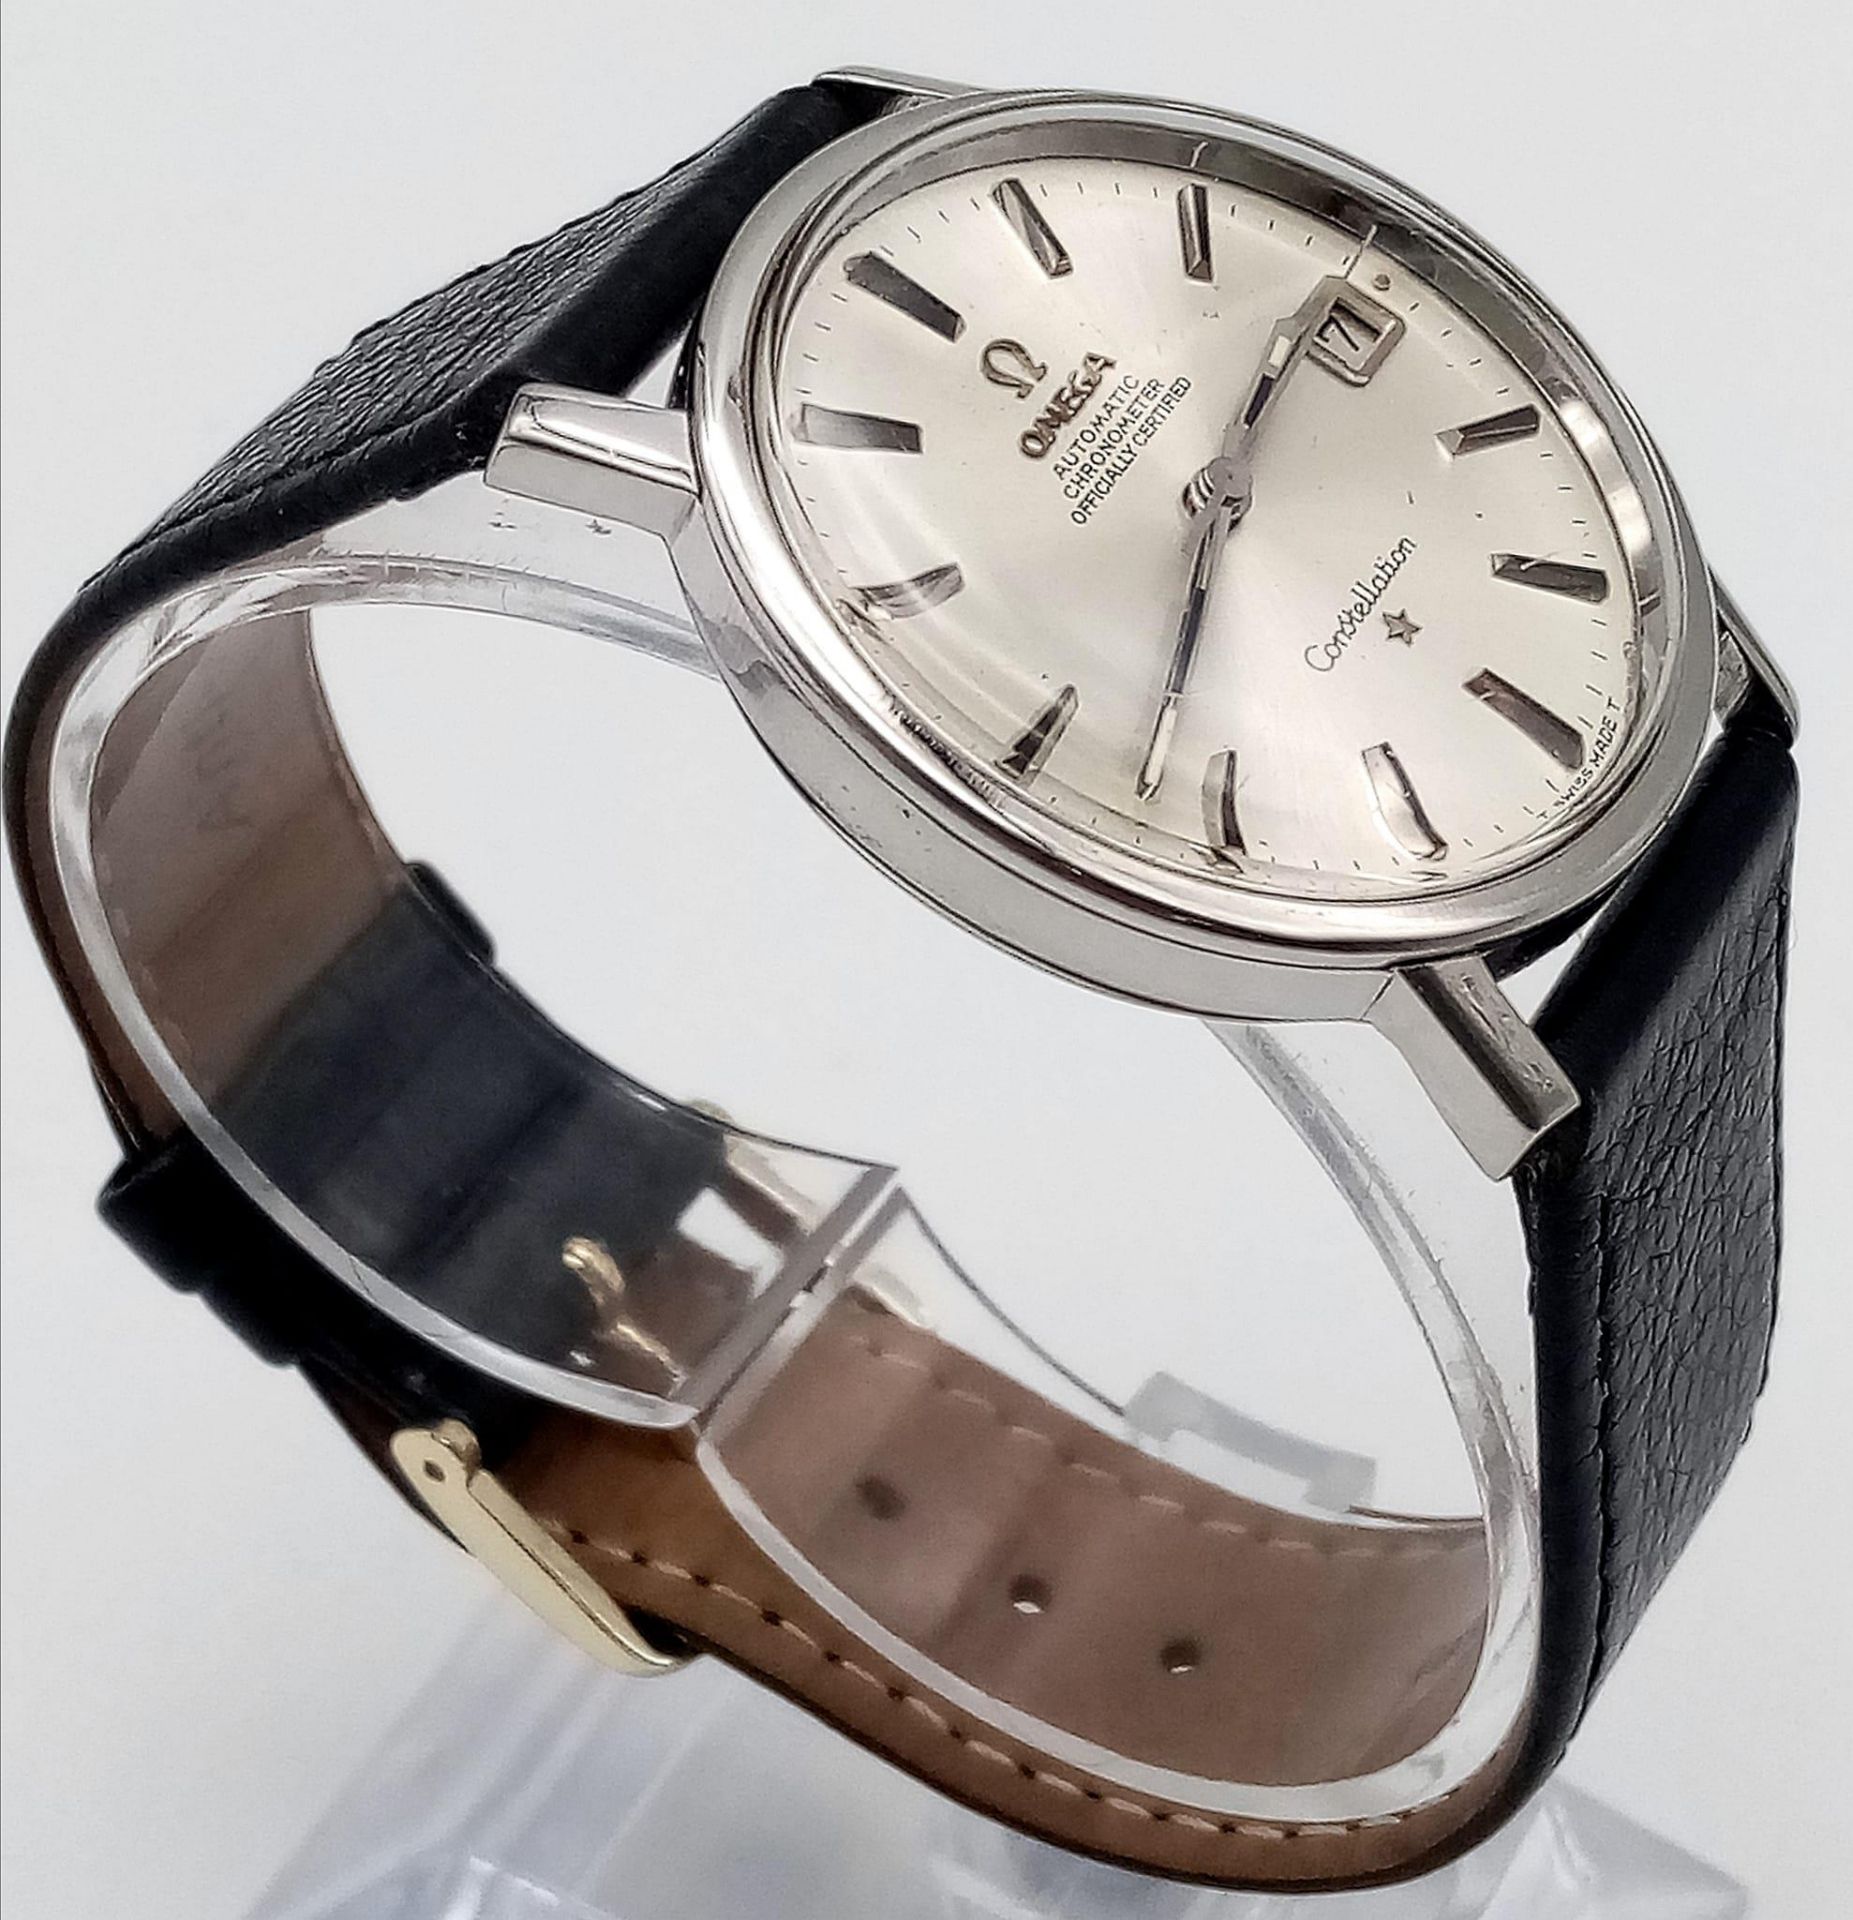 Omega Constellation Chronometer Men's Watch. Automatic movement, leather strap, 32mm dial. Circa - Image 7 of 13